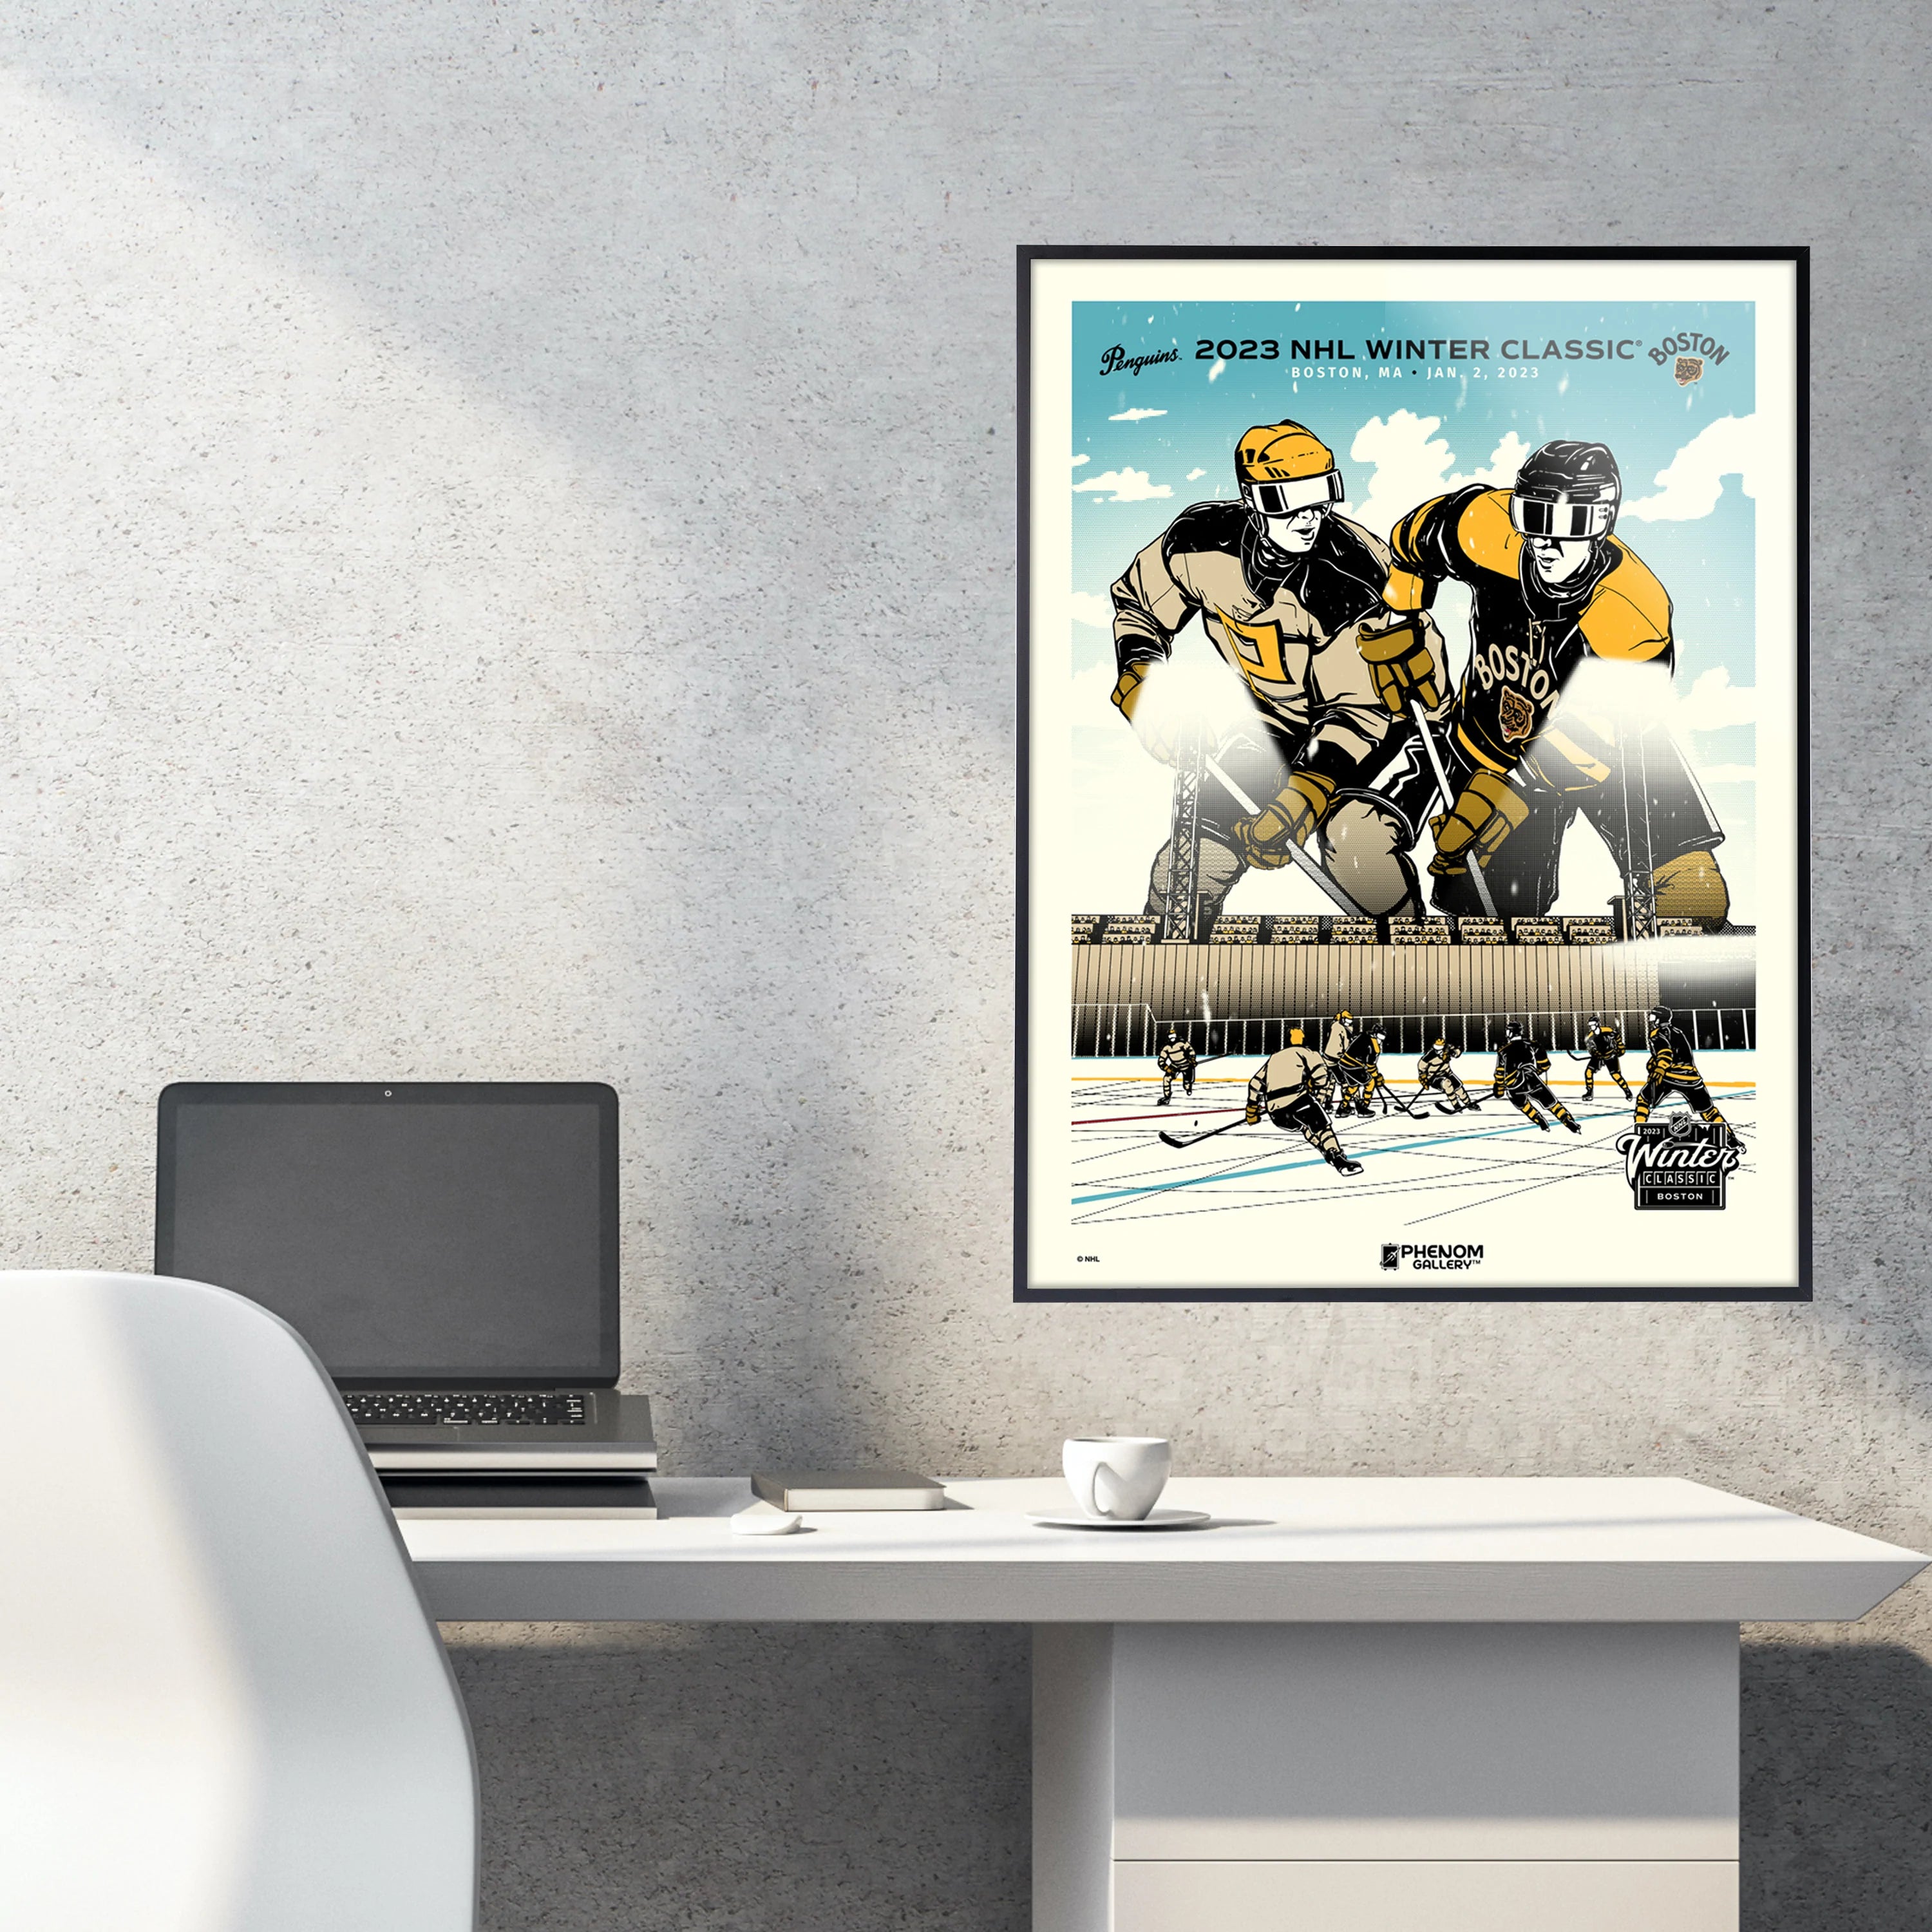 Pittsburgh Penguins vs. Boston Bruins 2023 Winter Classic Framed 20'' x 24'' 3-Photograph Collage with Game-Used Ice - Limited Edition of 500